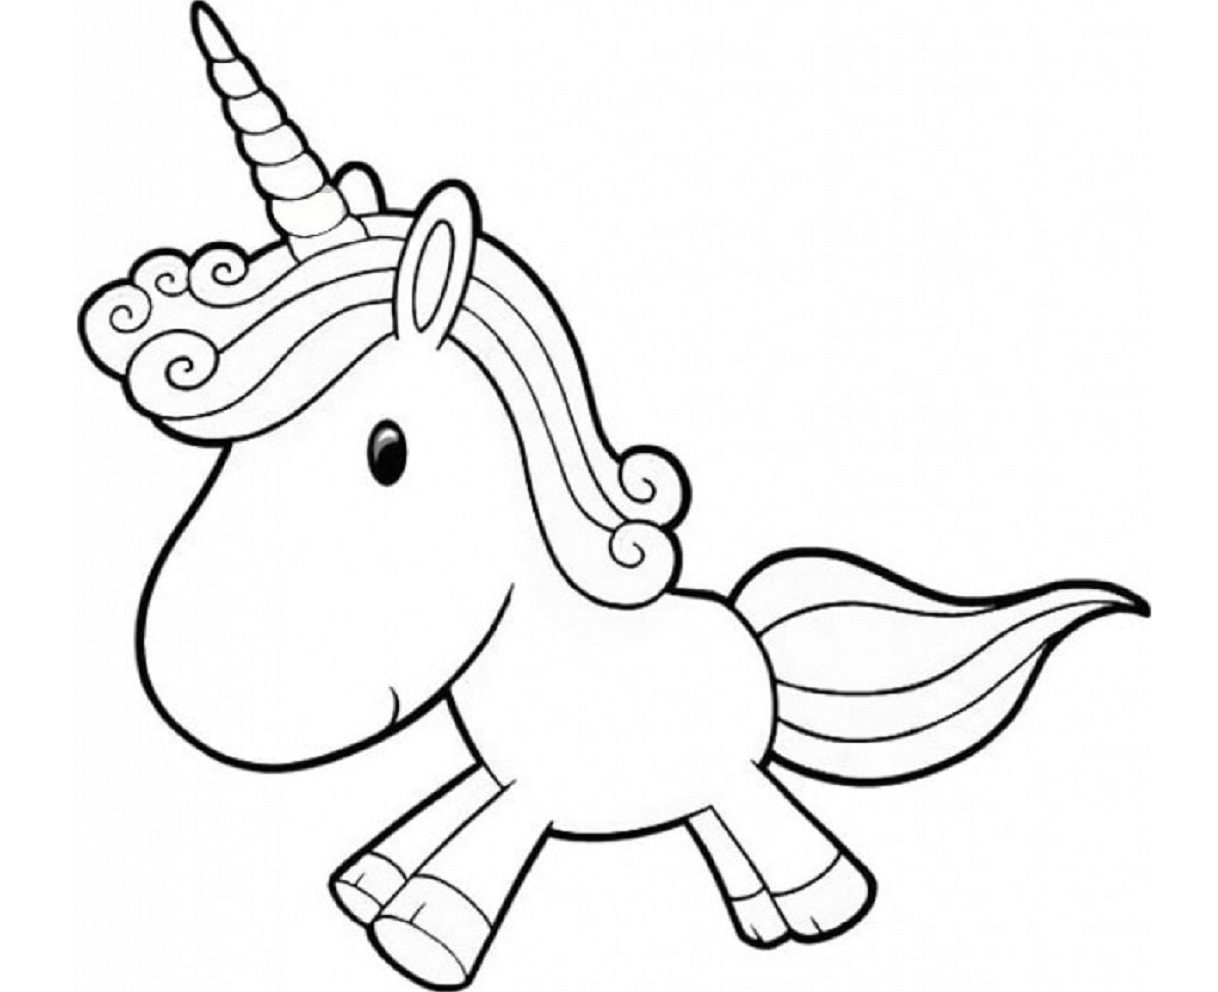 740  Halloween Coloring Pages Unicorn  Free